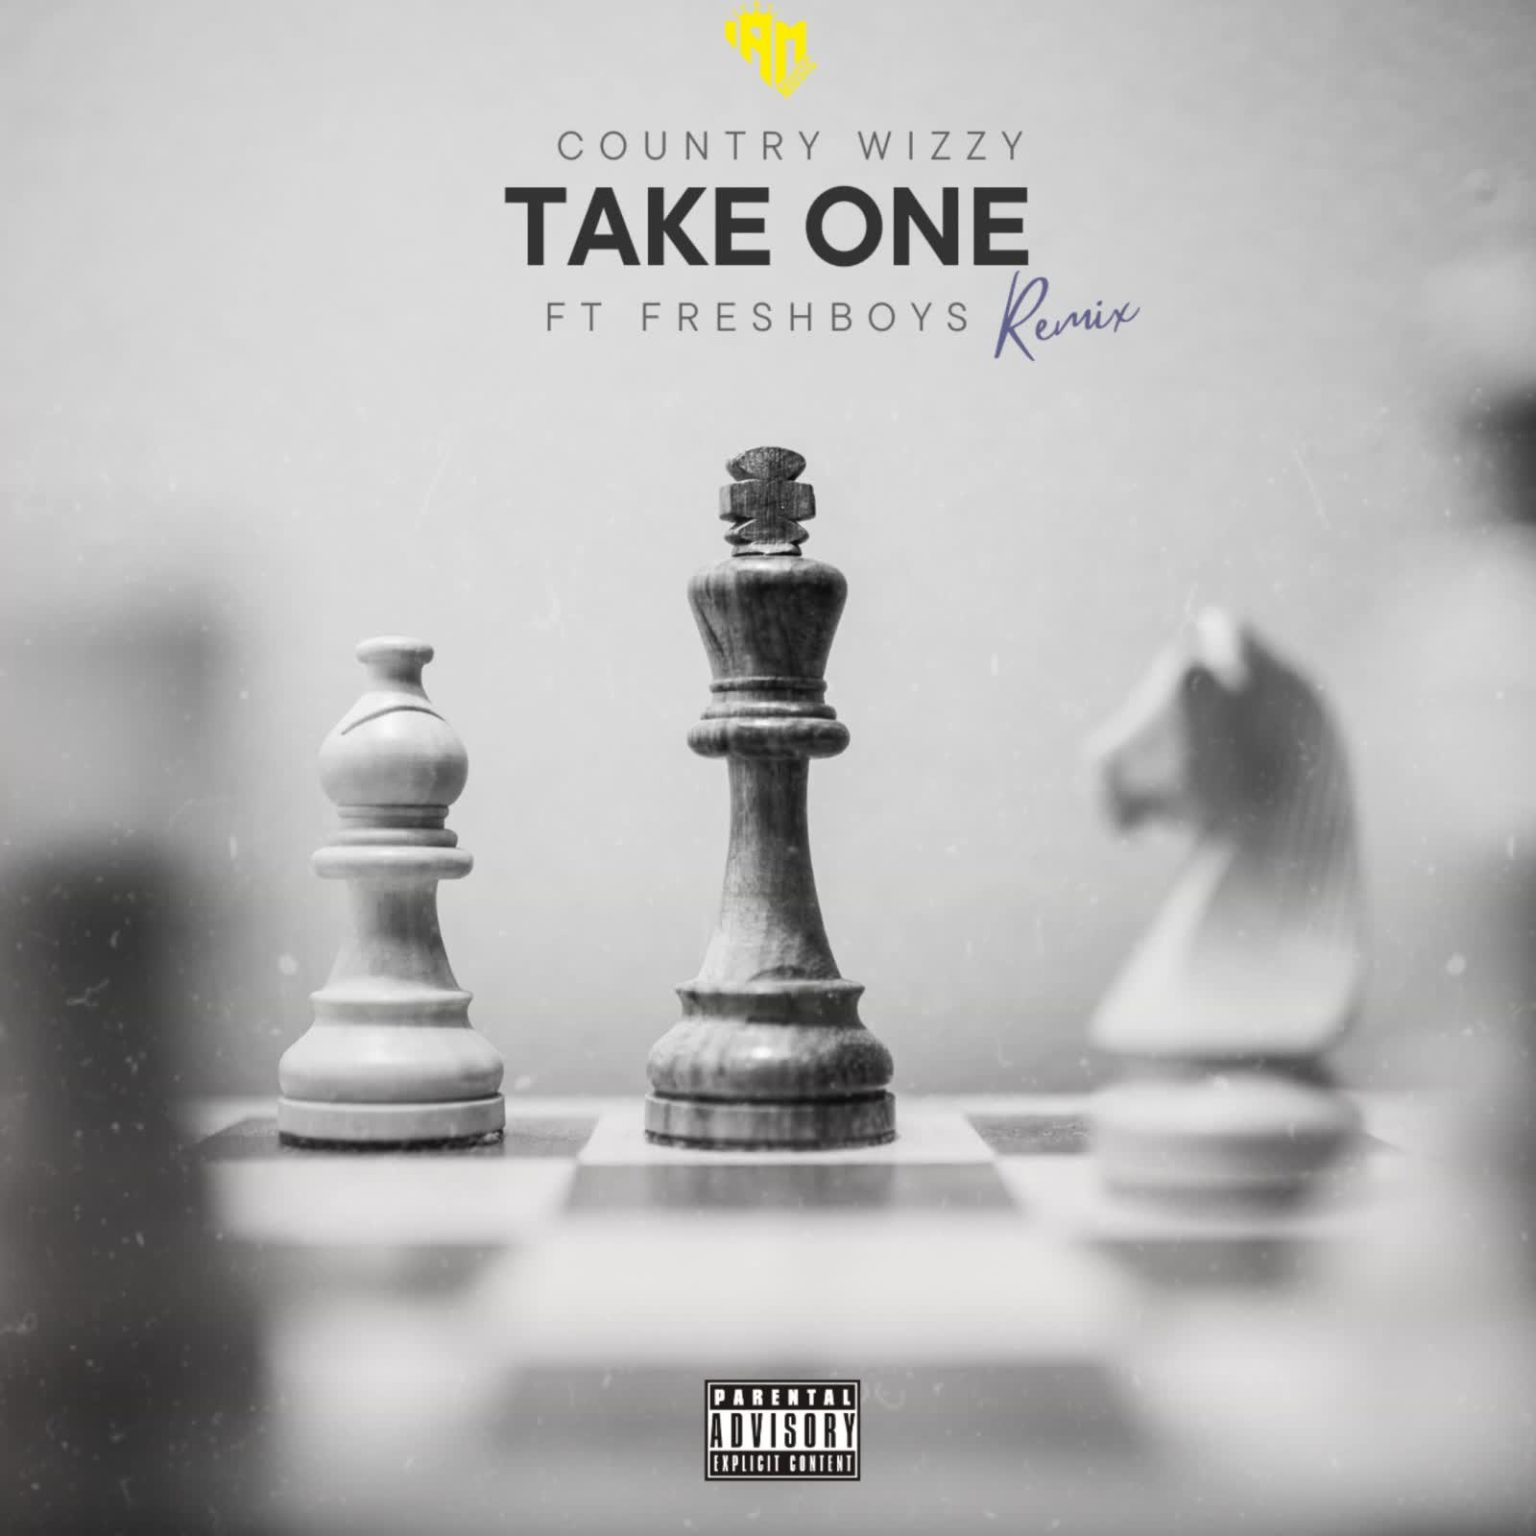  Country Wizzy Ft. FreshBoys – Take One (Remix)